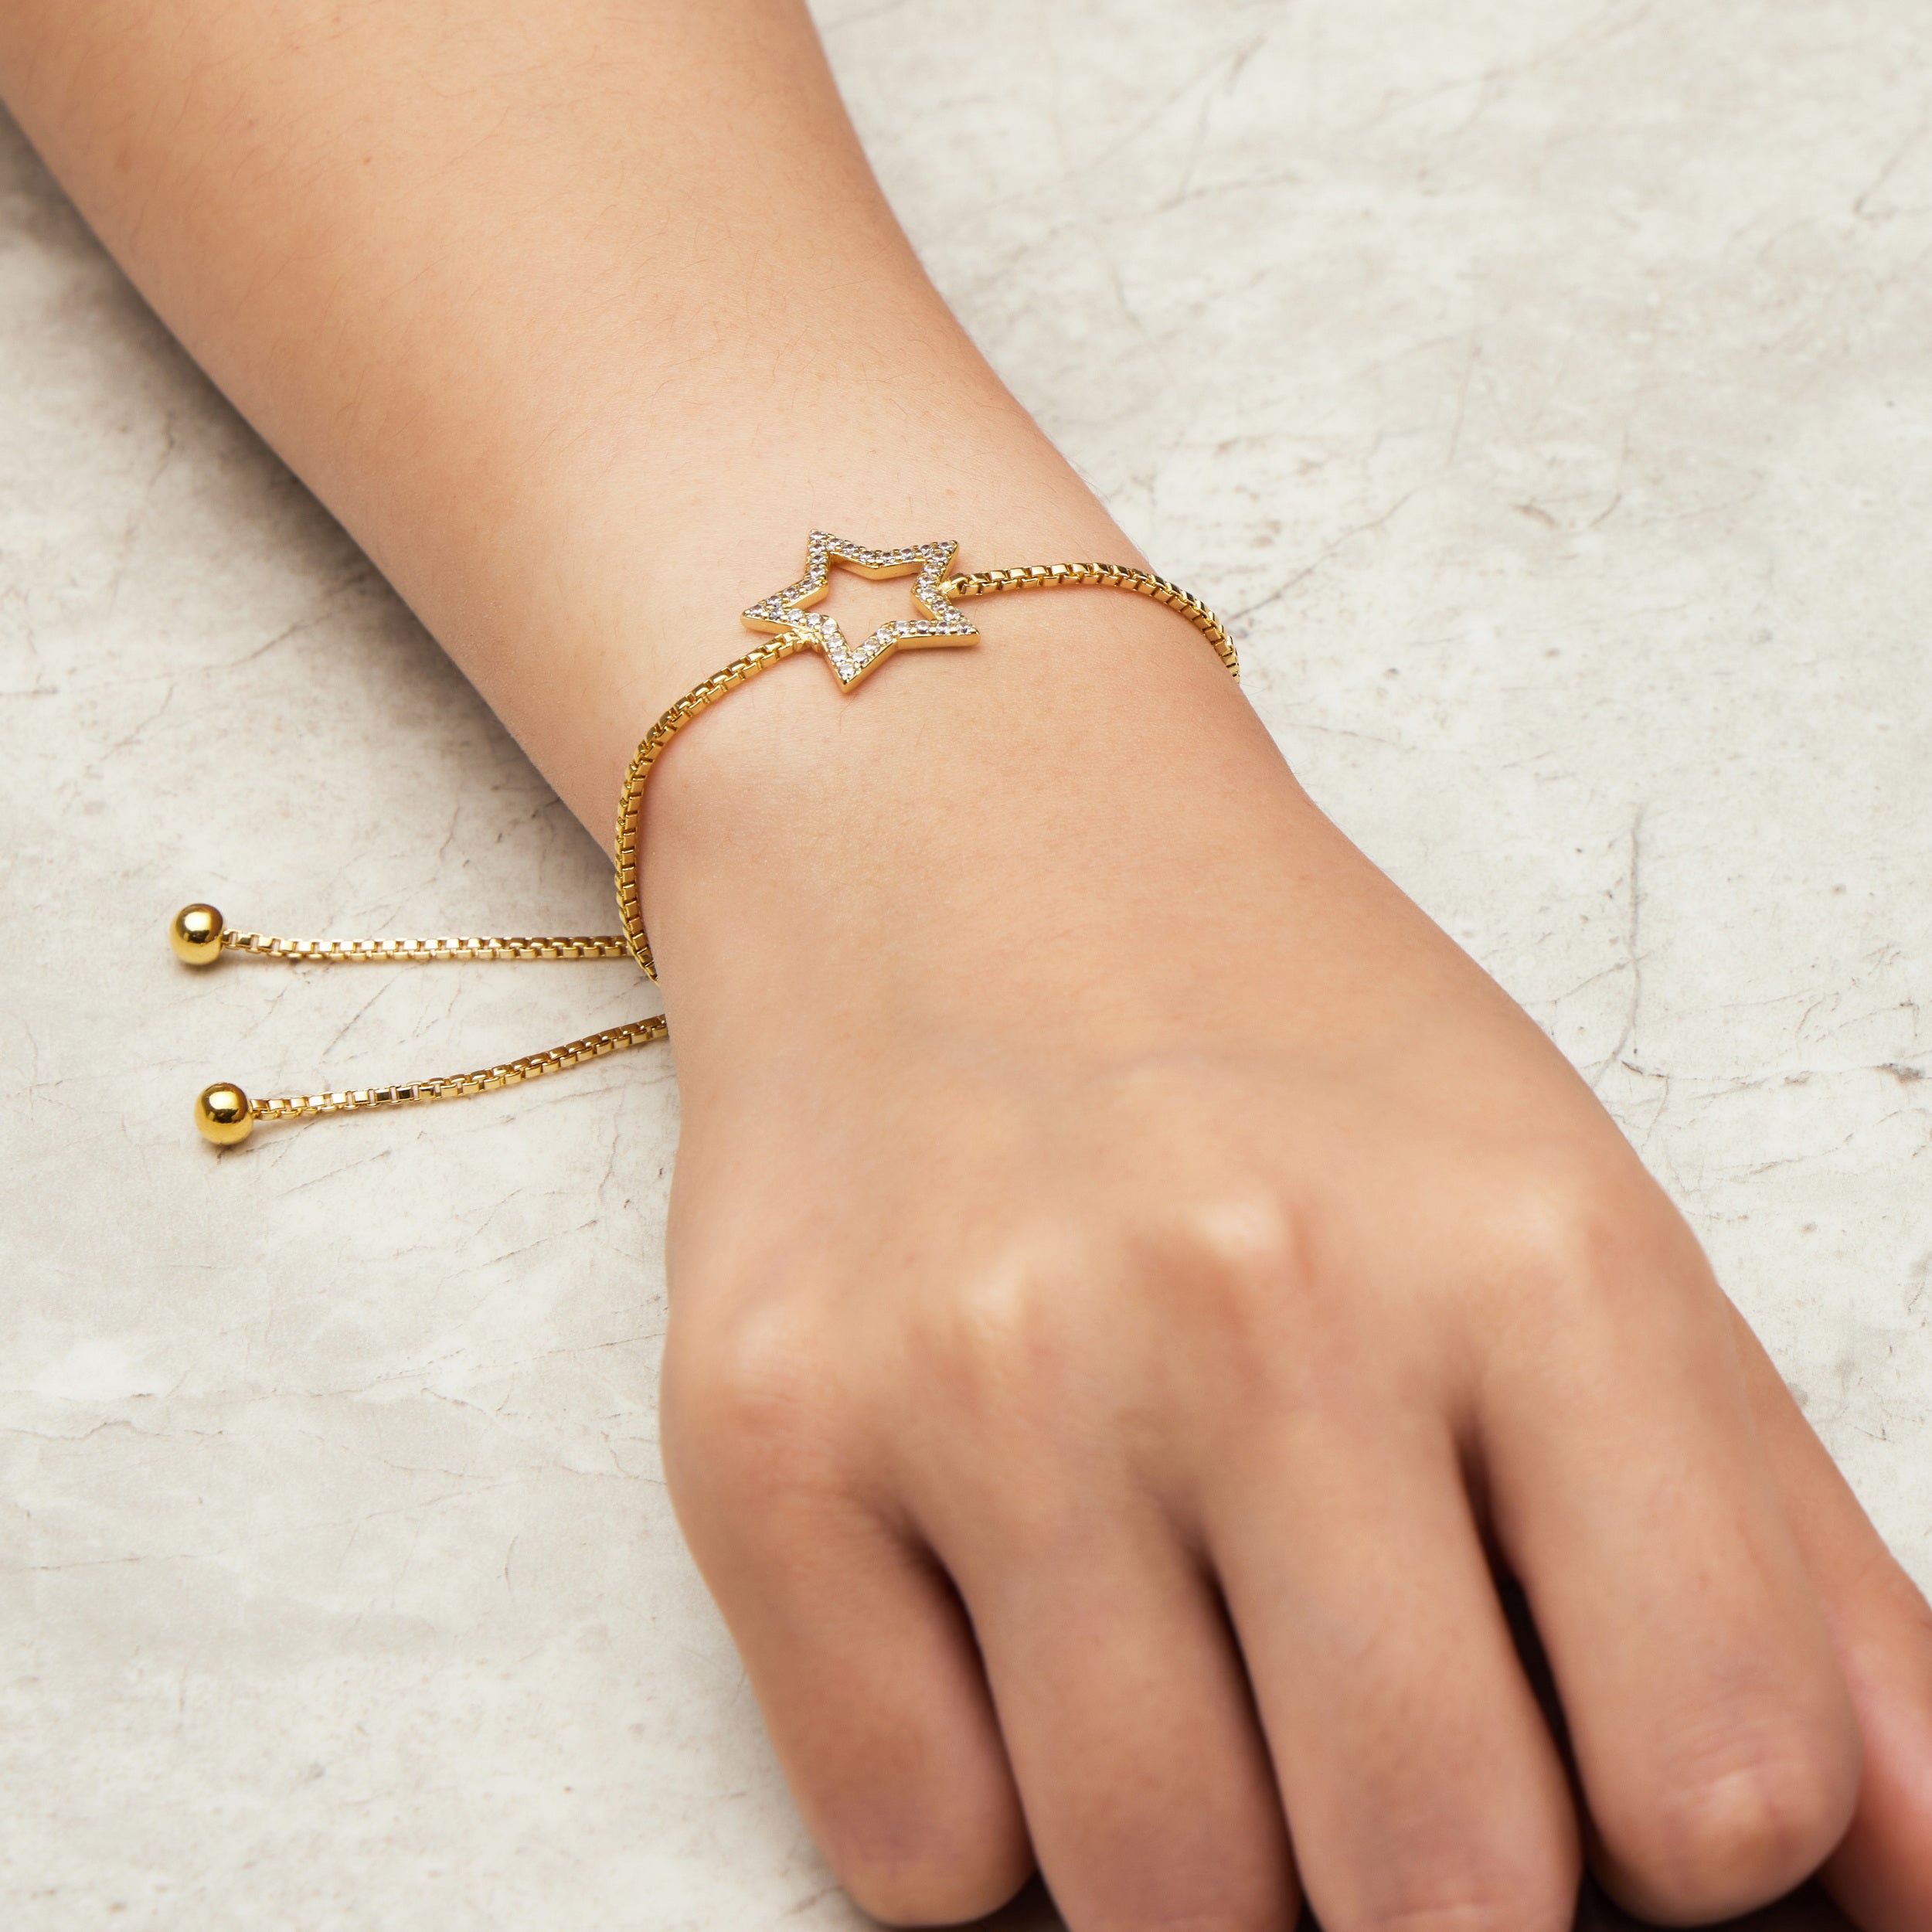 Gold Plated Star Friendship Bracelet Created with Zircondia® Crystals